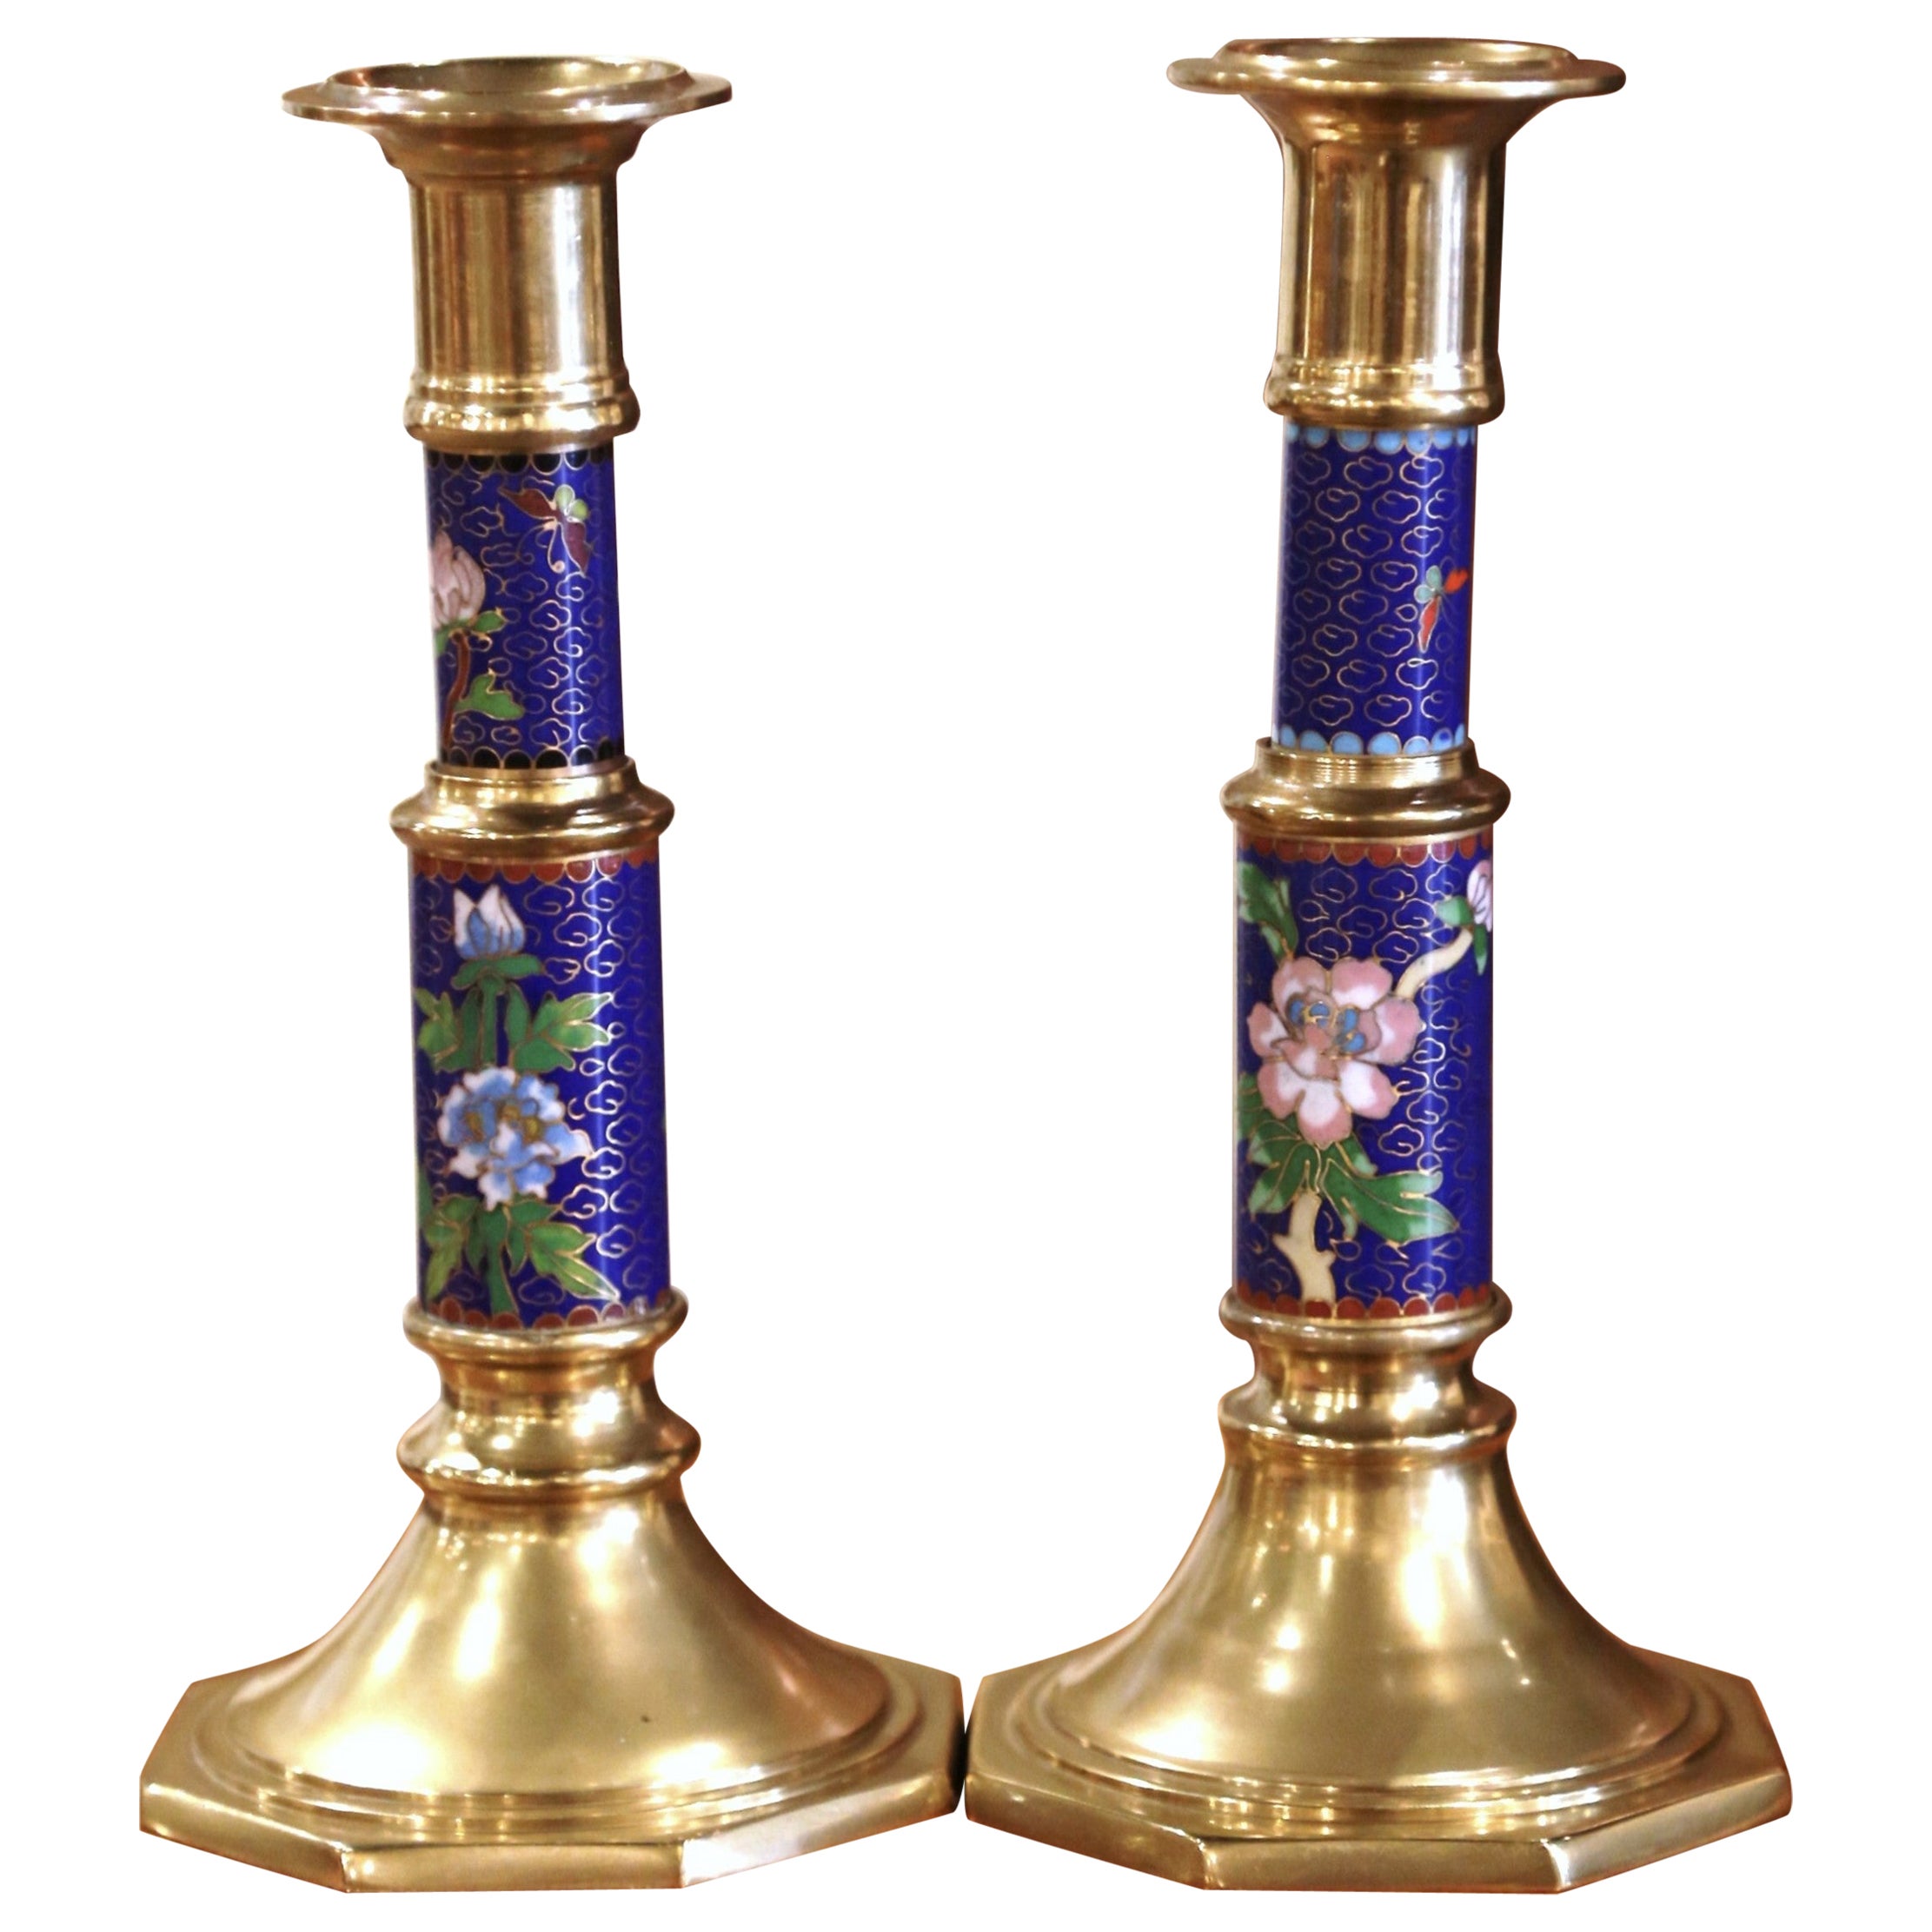 Pair of Vintage Brass Champleve Candle Holders with Floral & Leaf Motifs